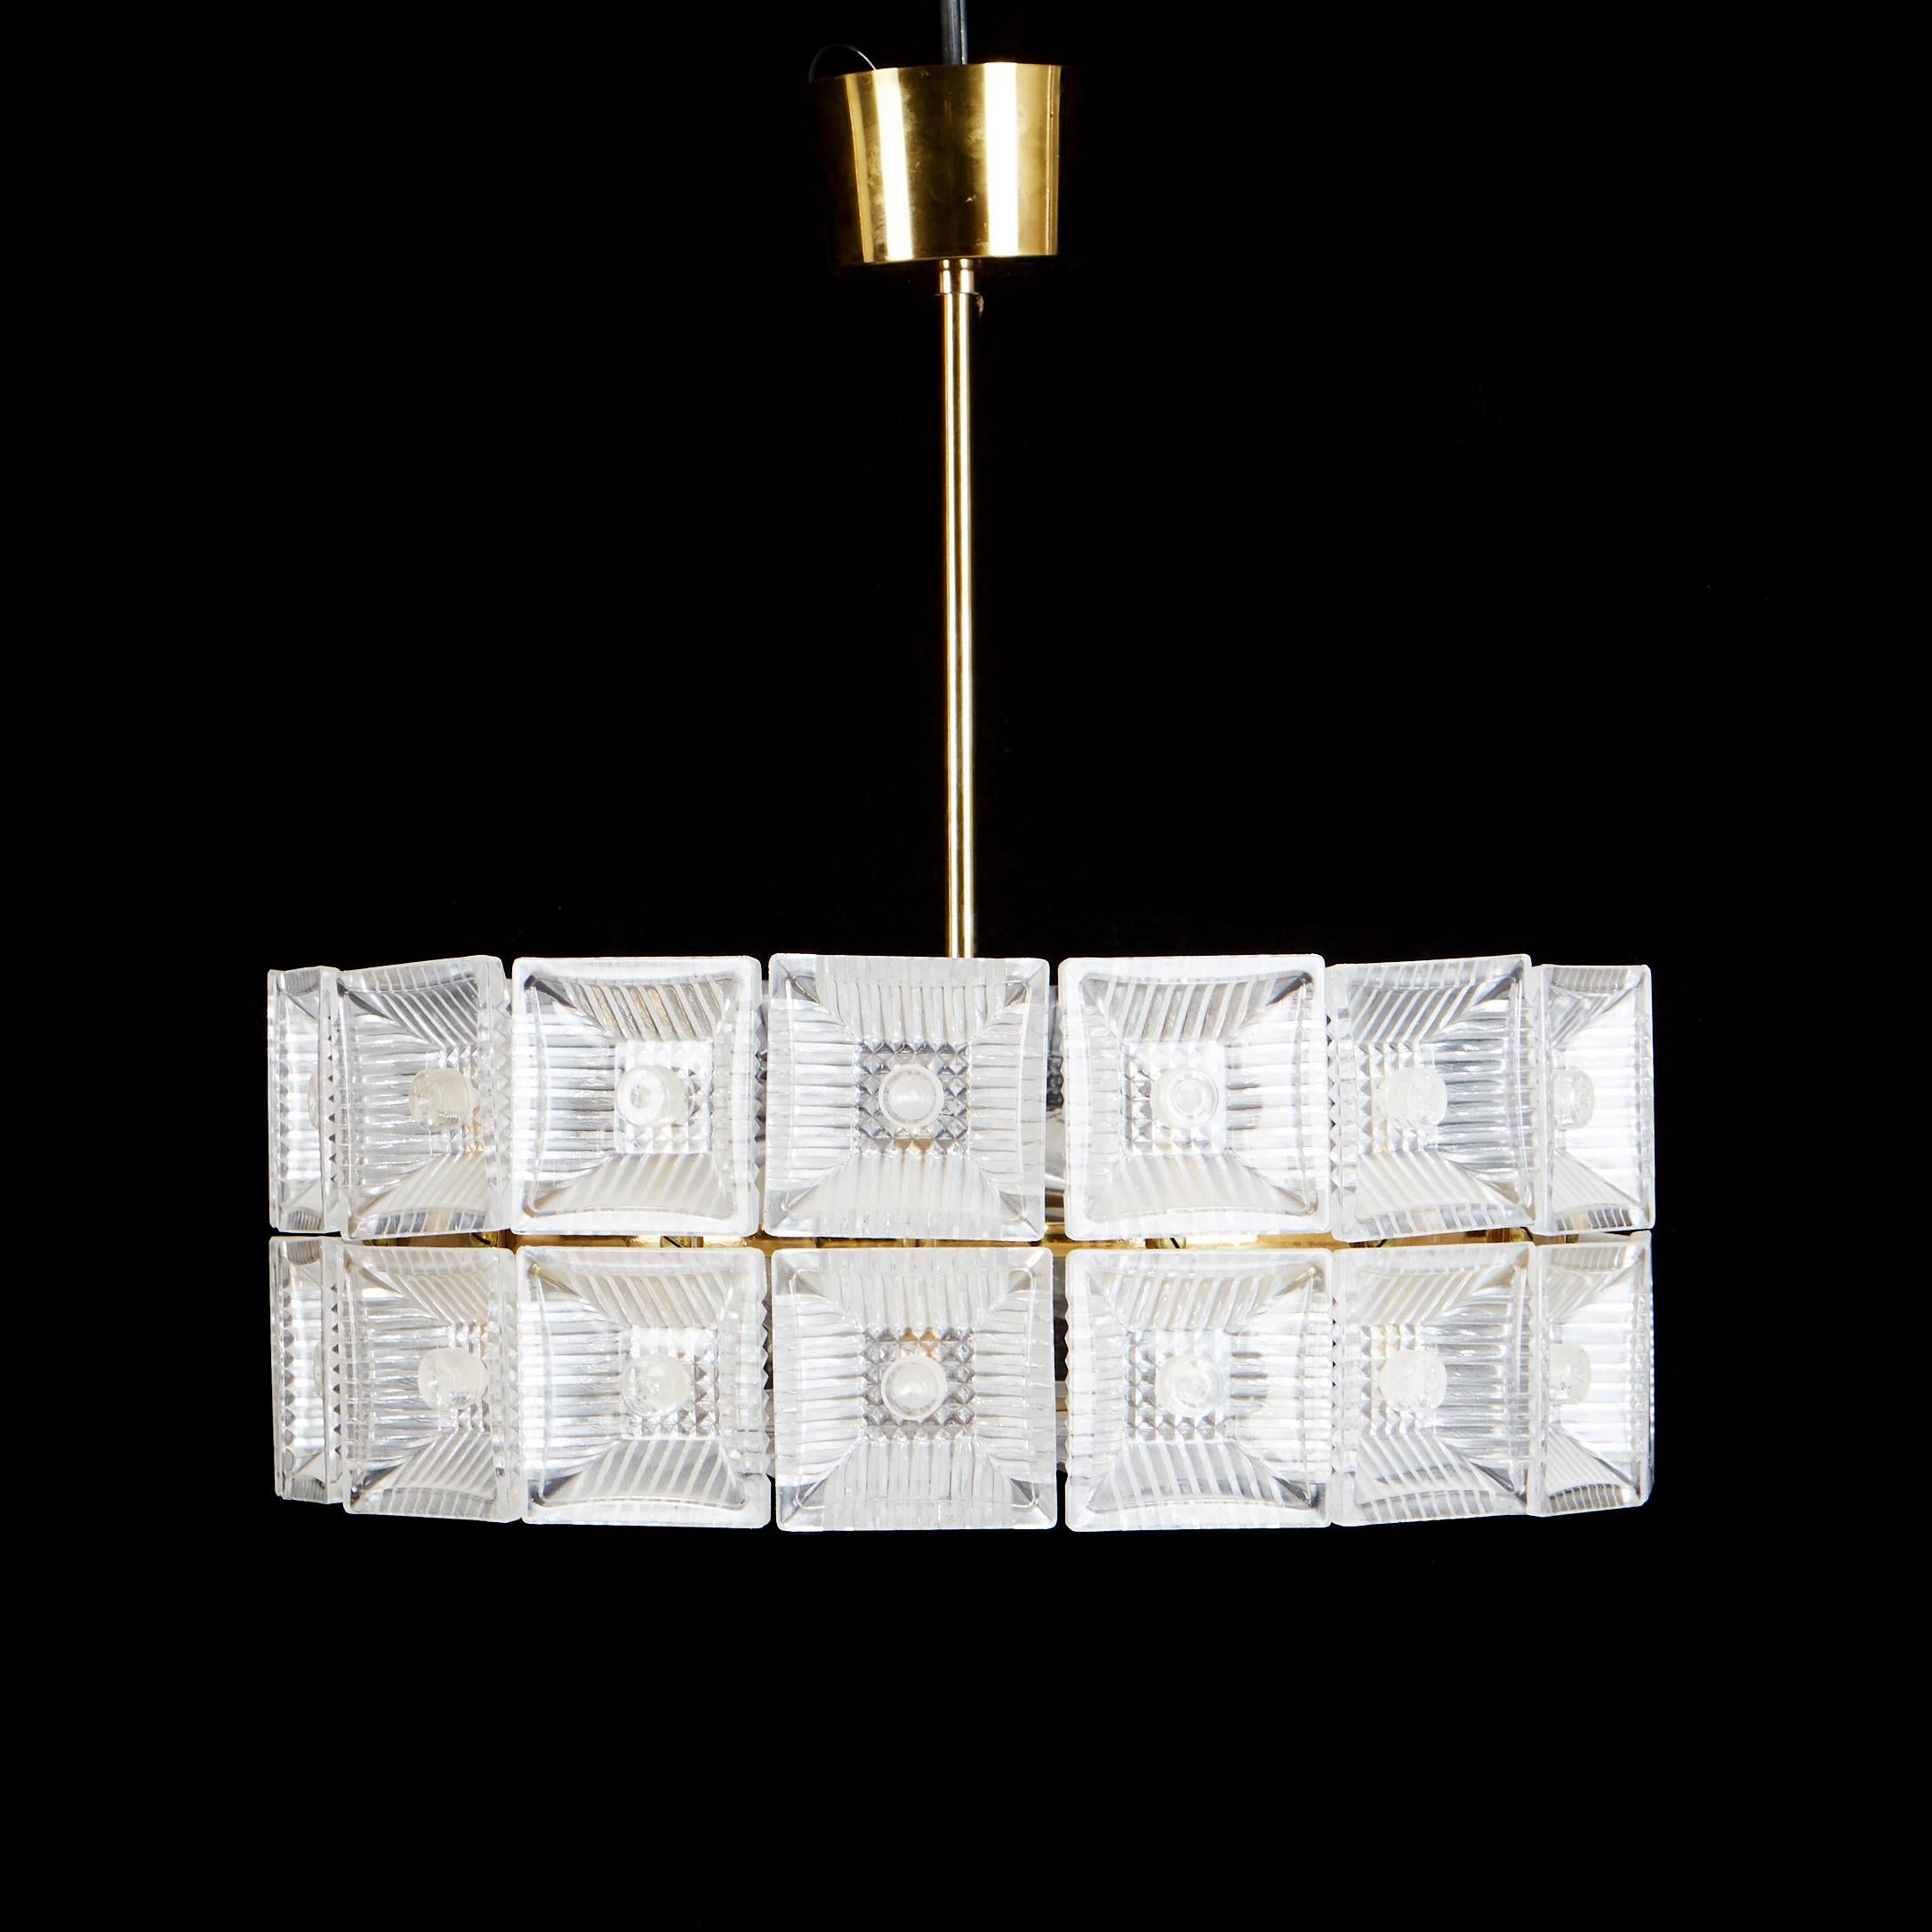 Swedish Chandelier by Carl Fagerlund for Orrefors Glassworks